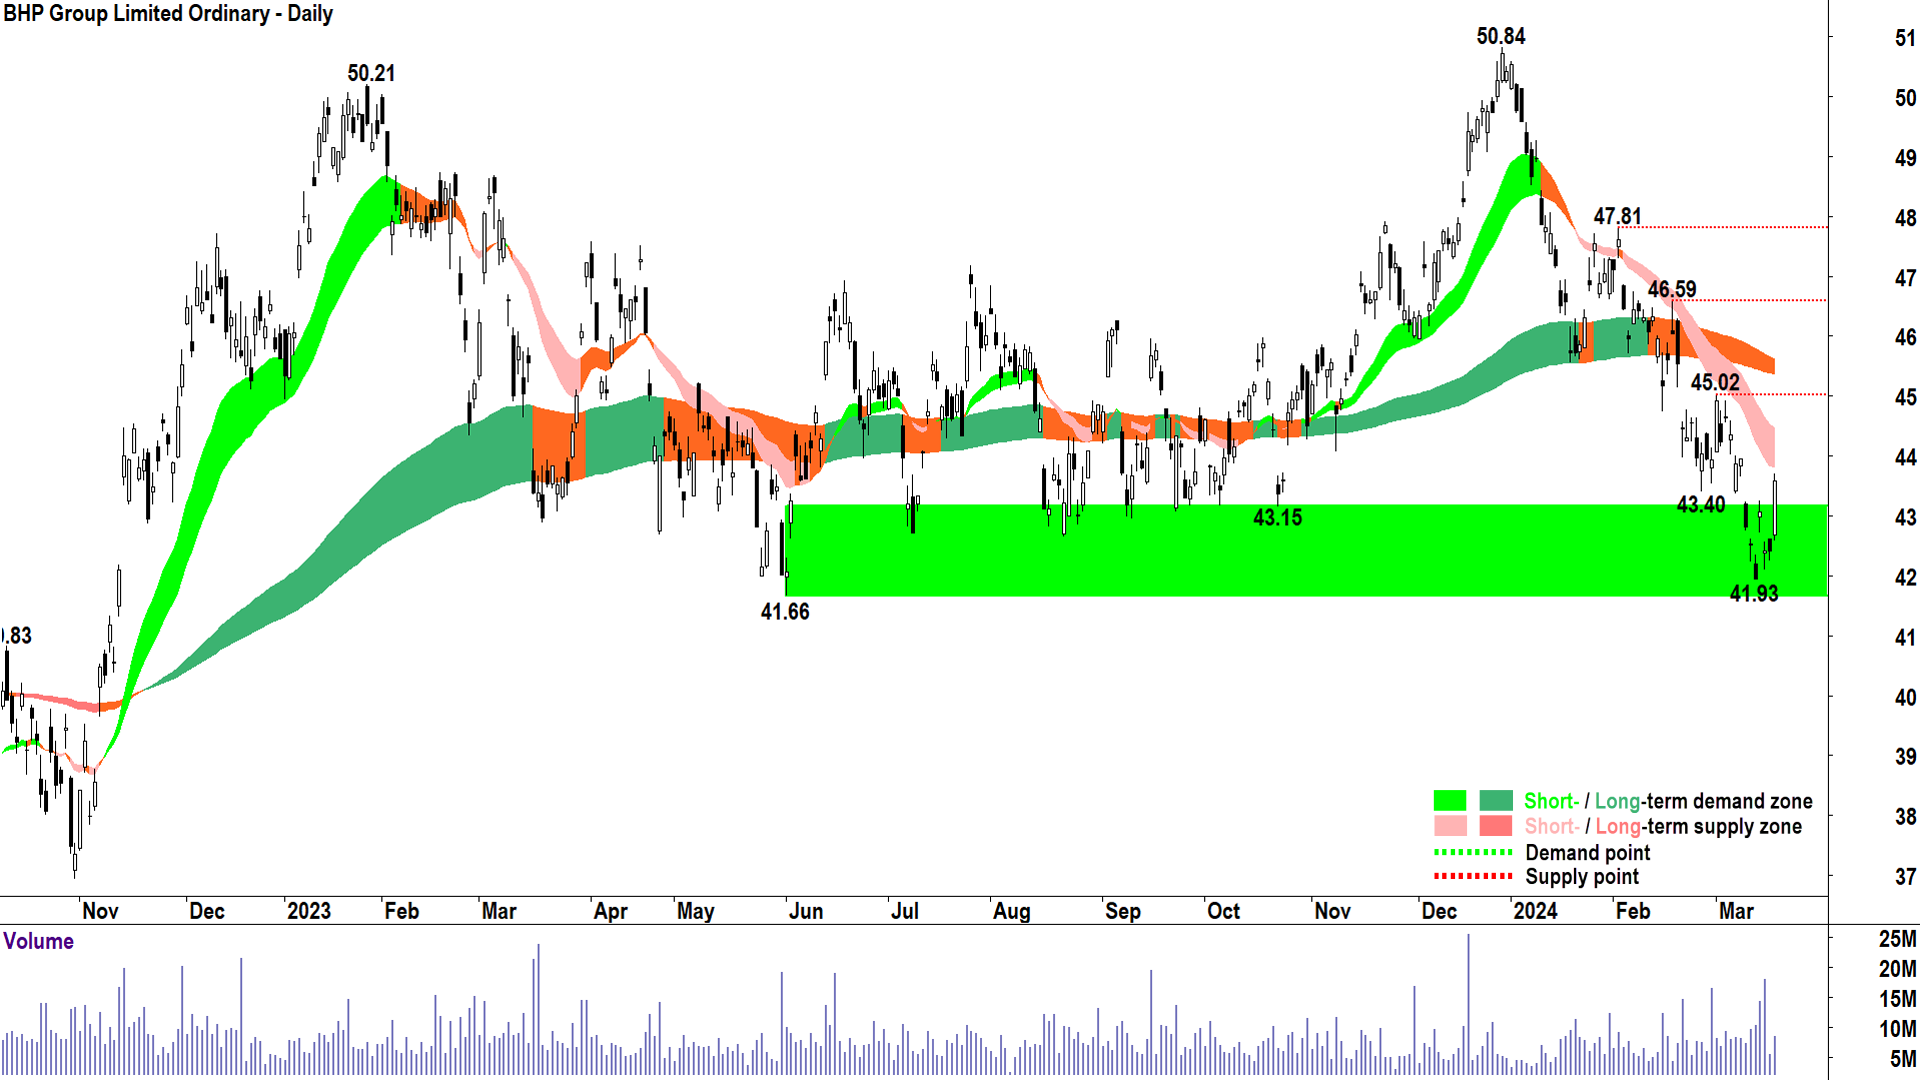 A case of light green zone marks the spot for BHP?